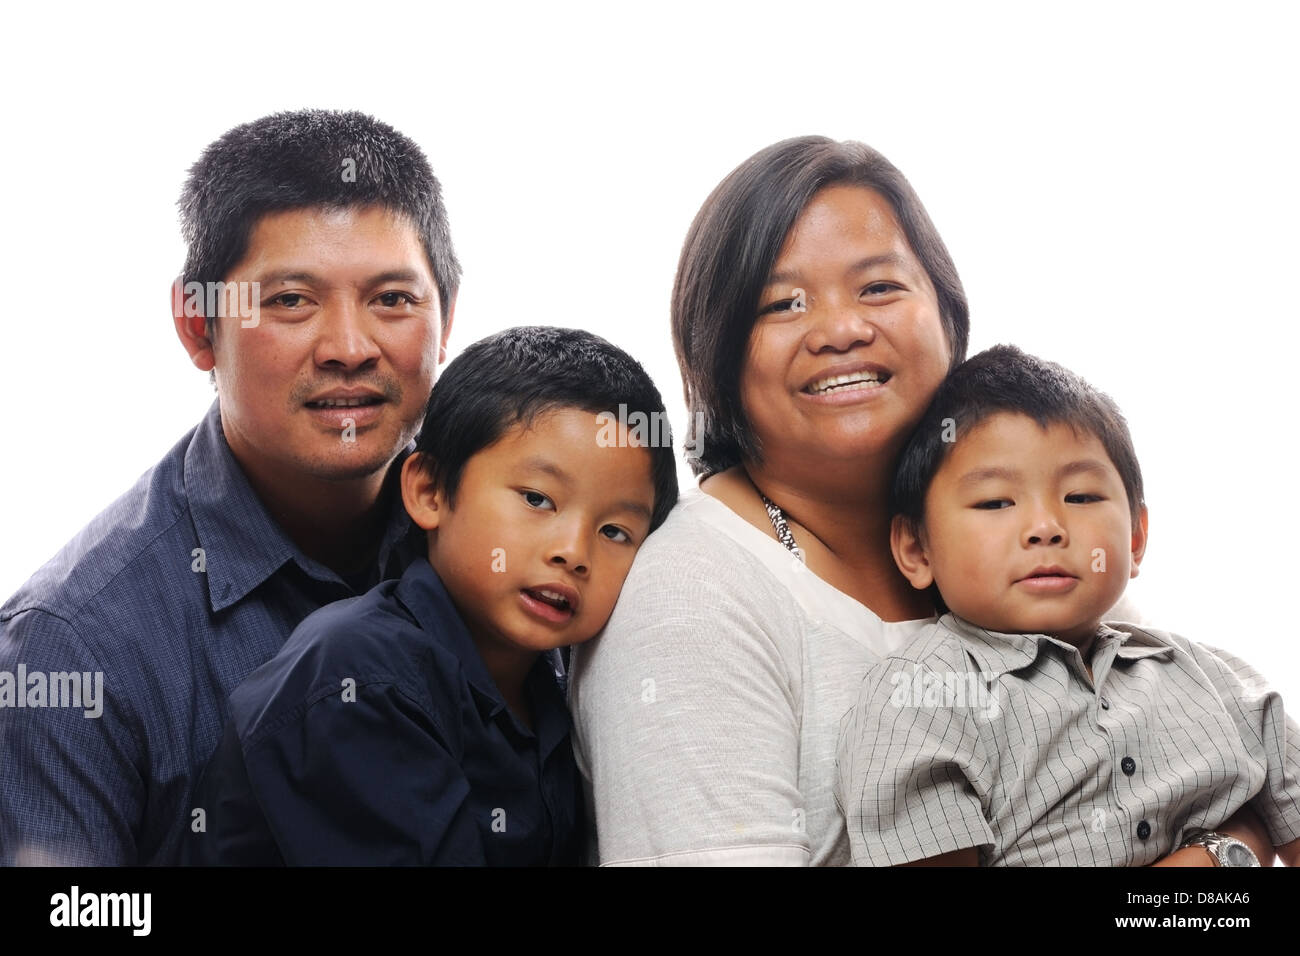 Asian family with two boys looking happy and smiling Stock Photo